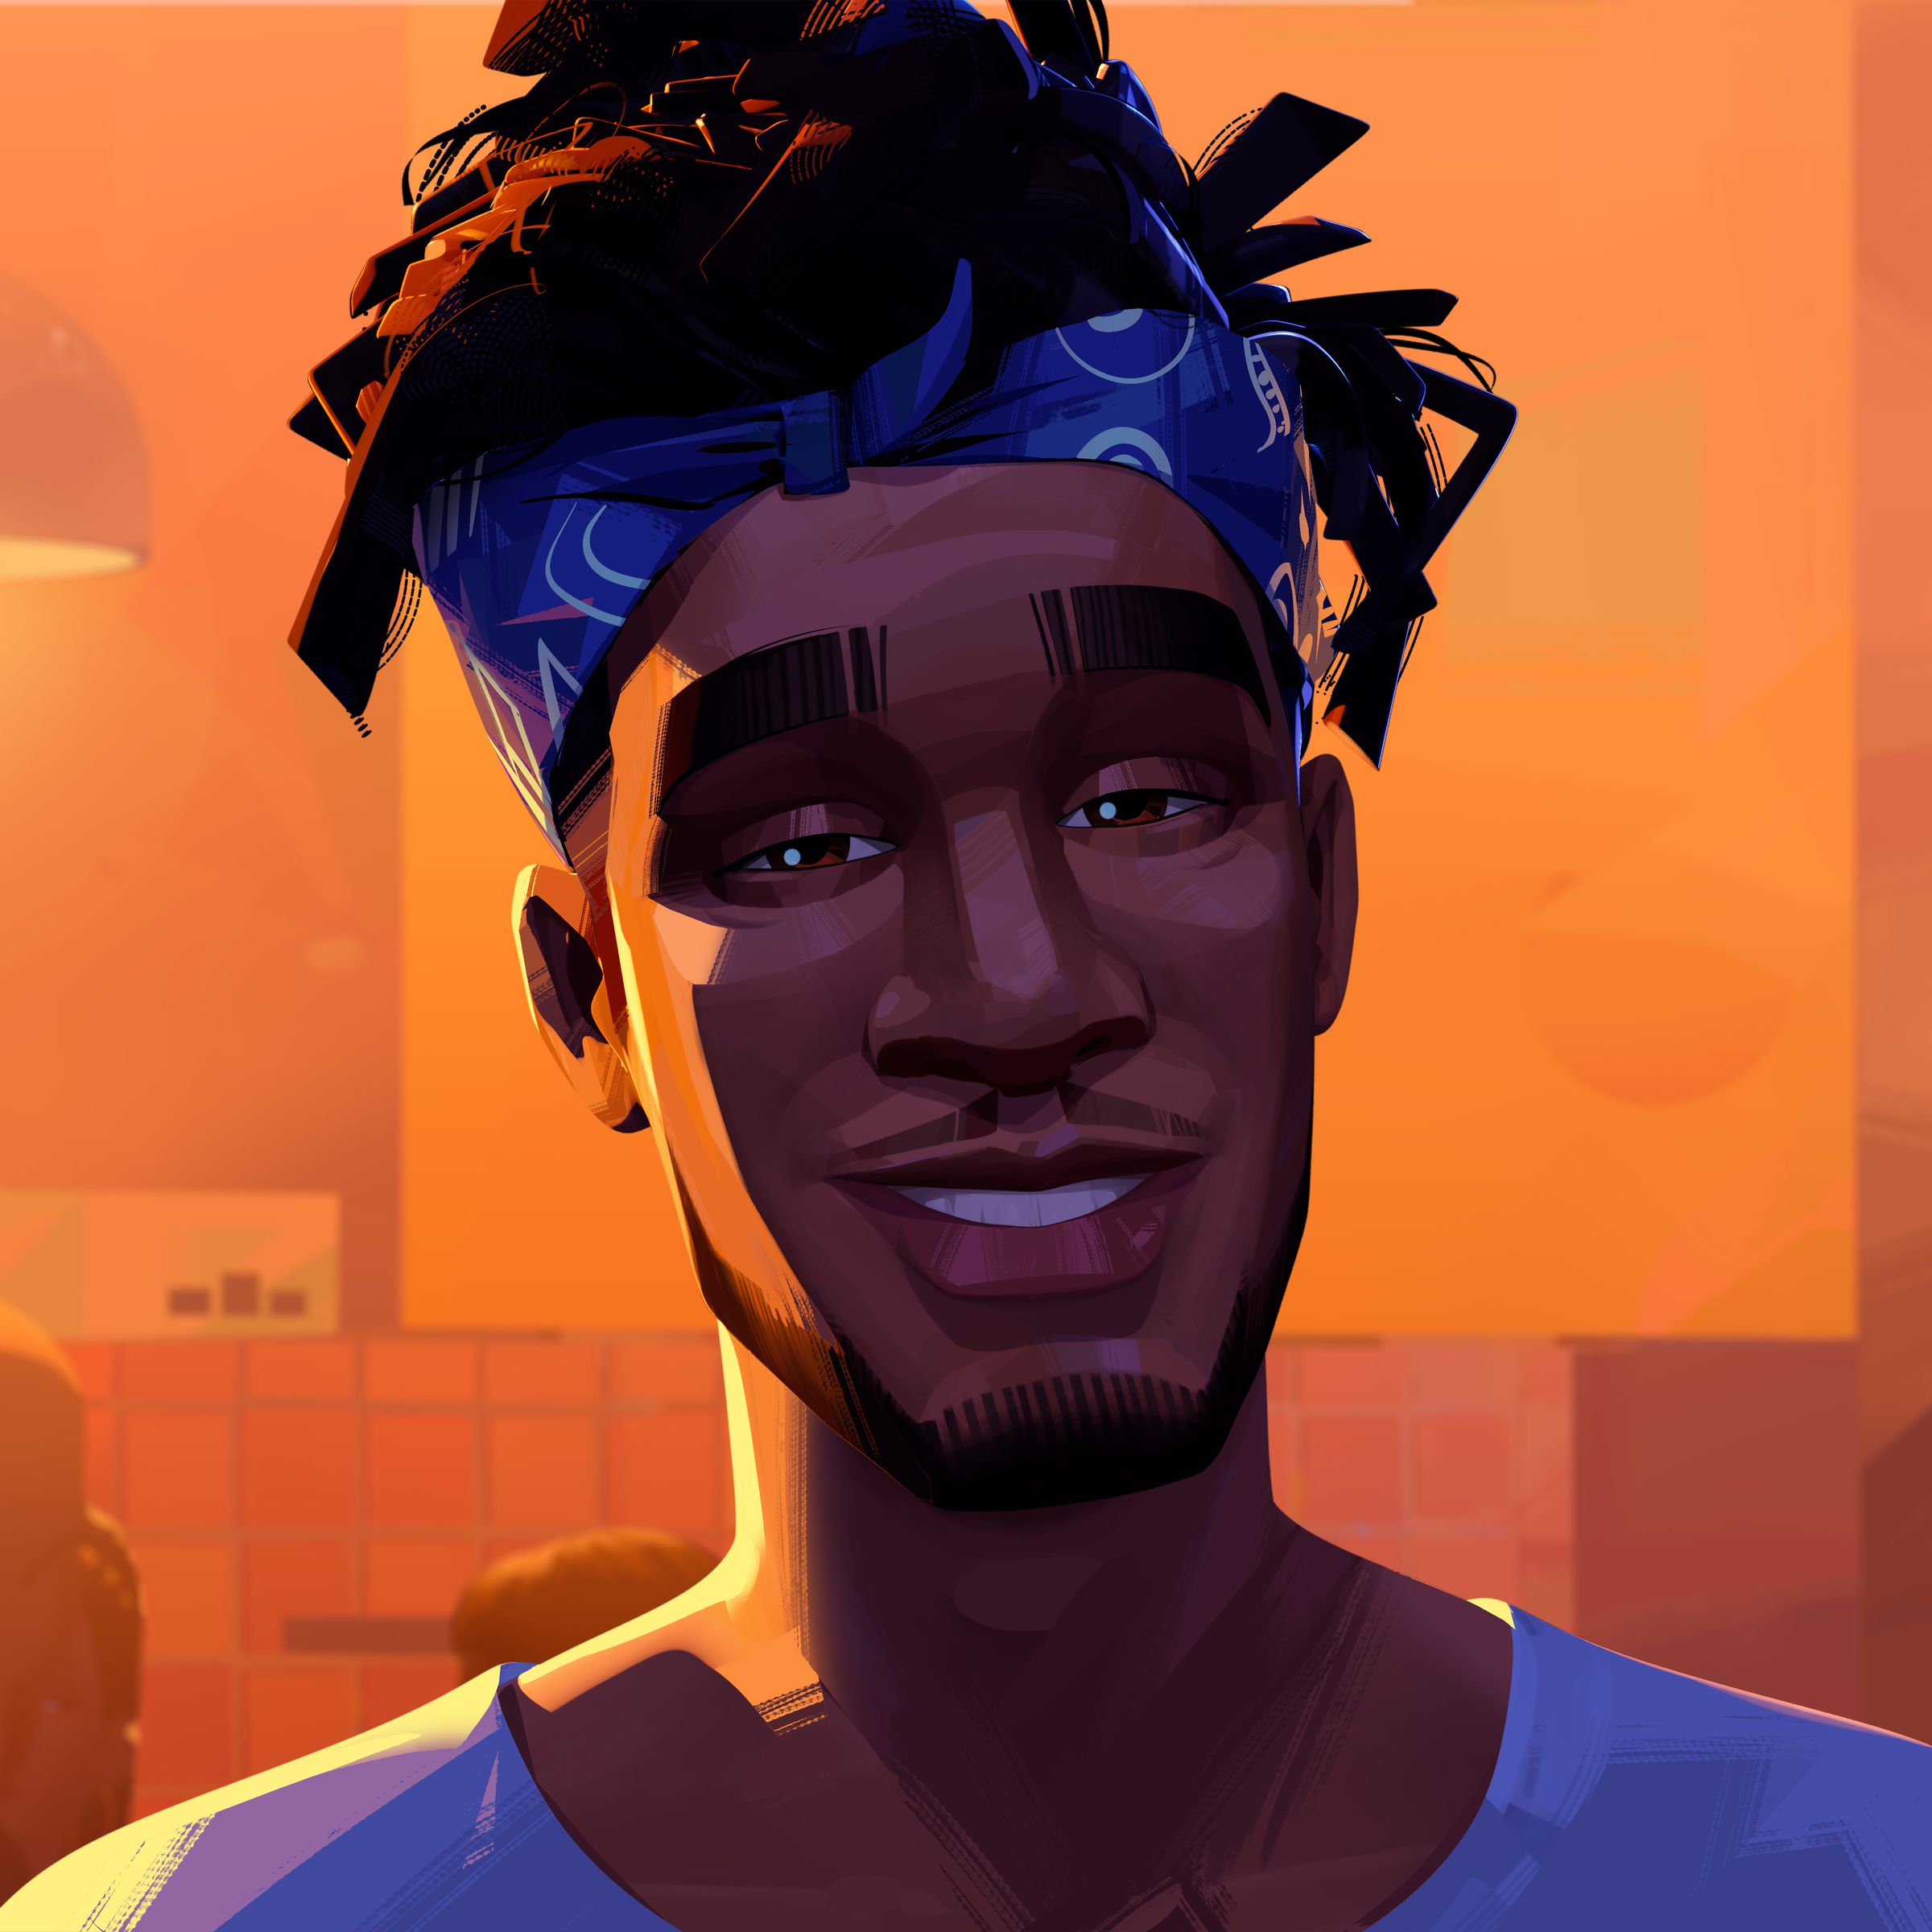 A man with locked hair tied up in a bandana standing in a warmly-lit room where a party’s taking place.